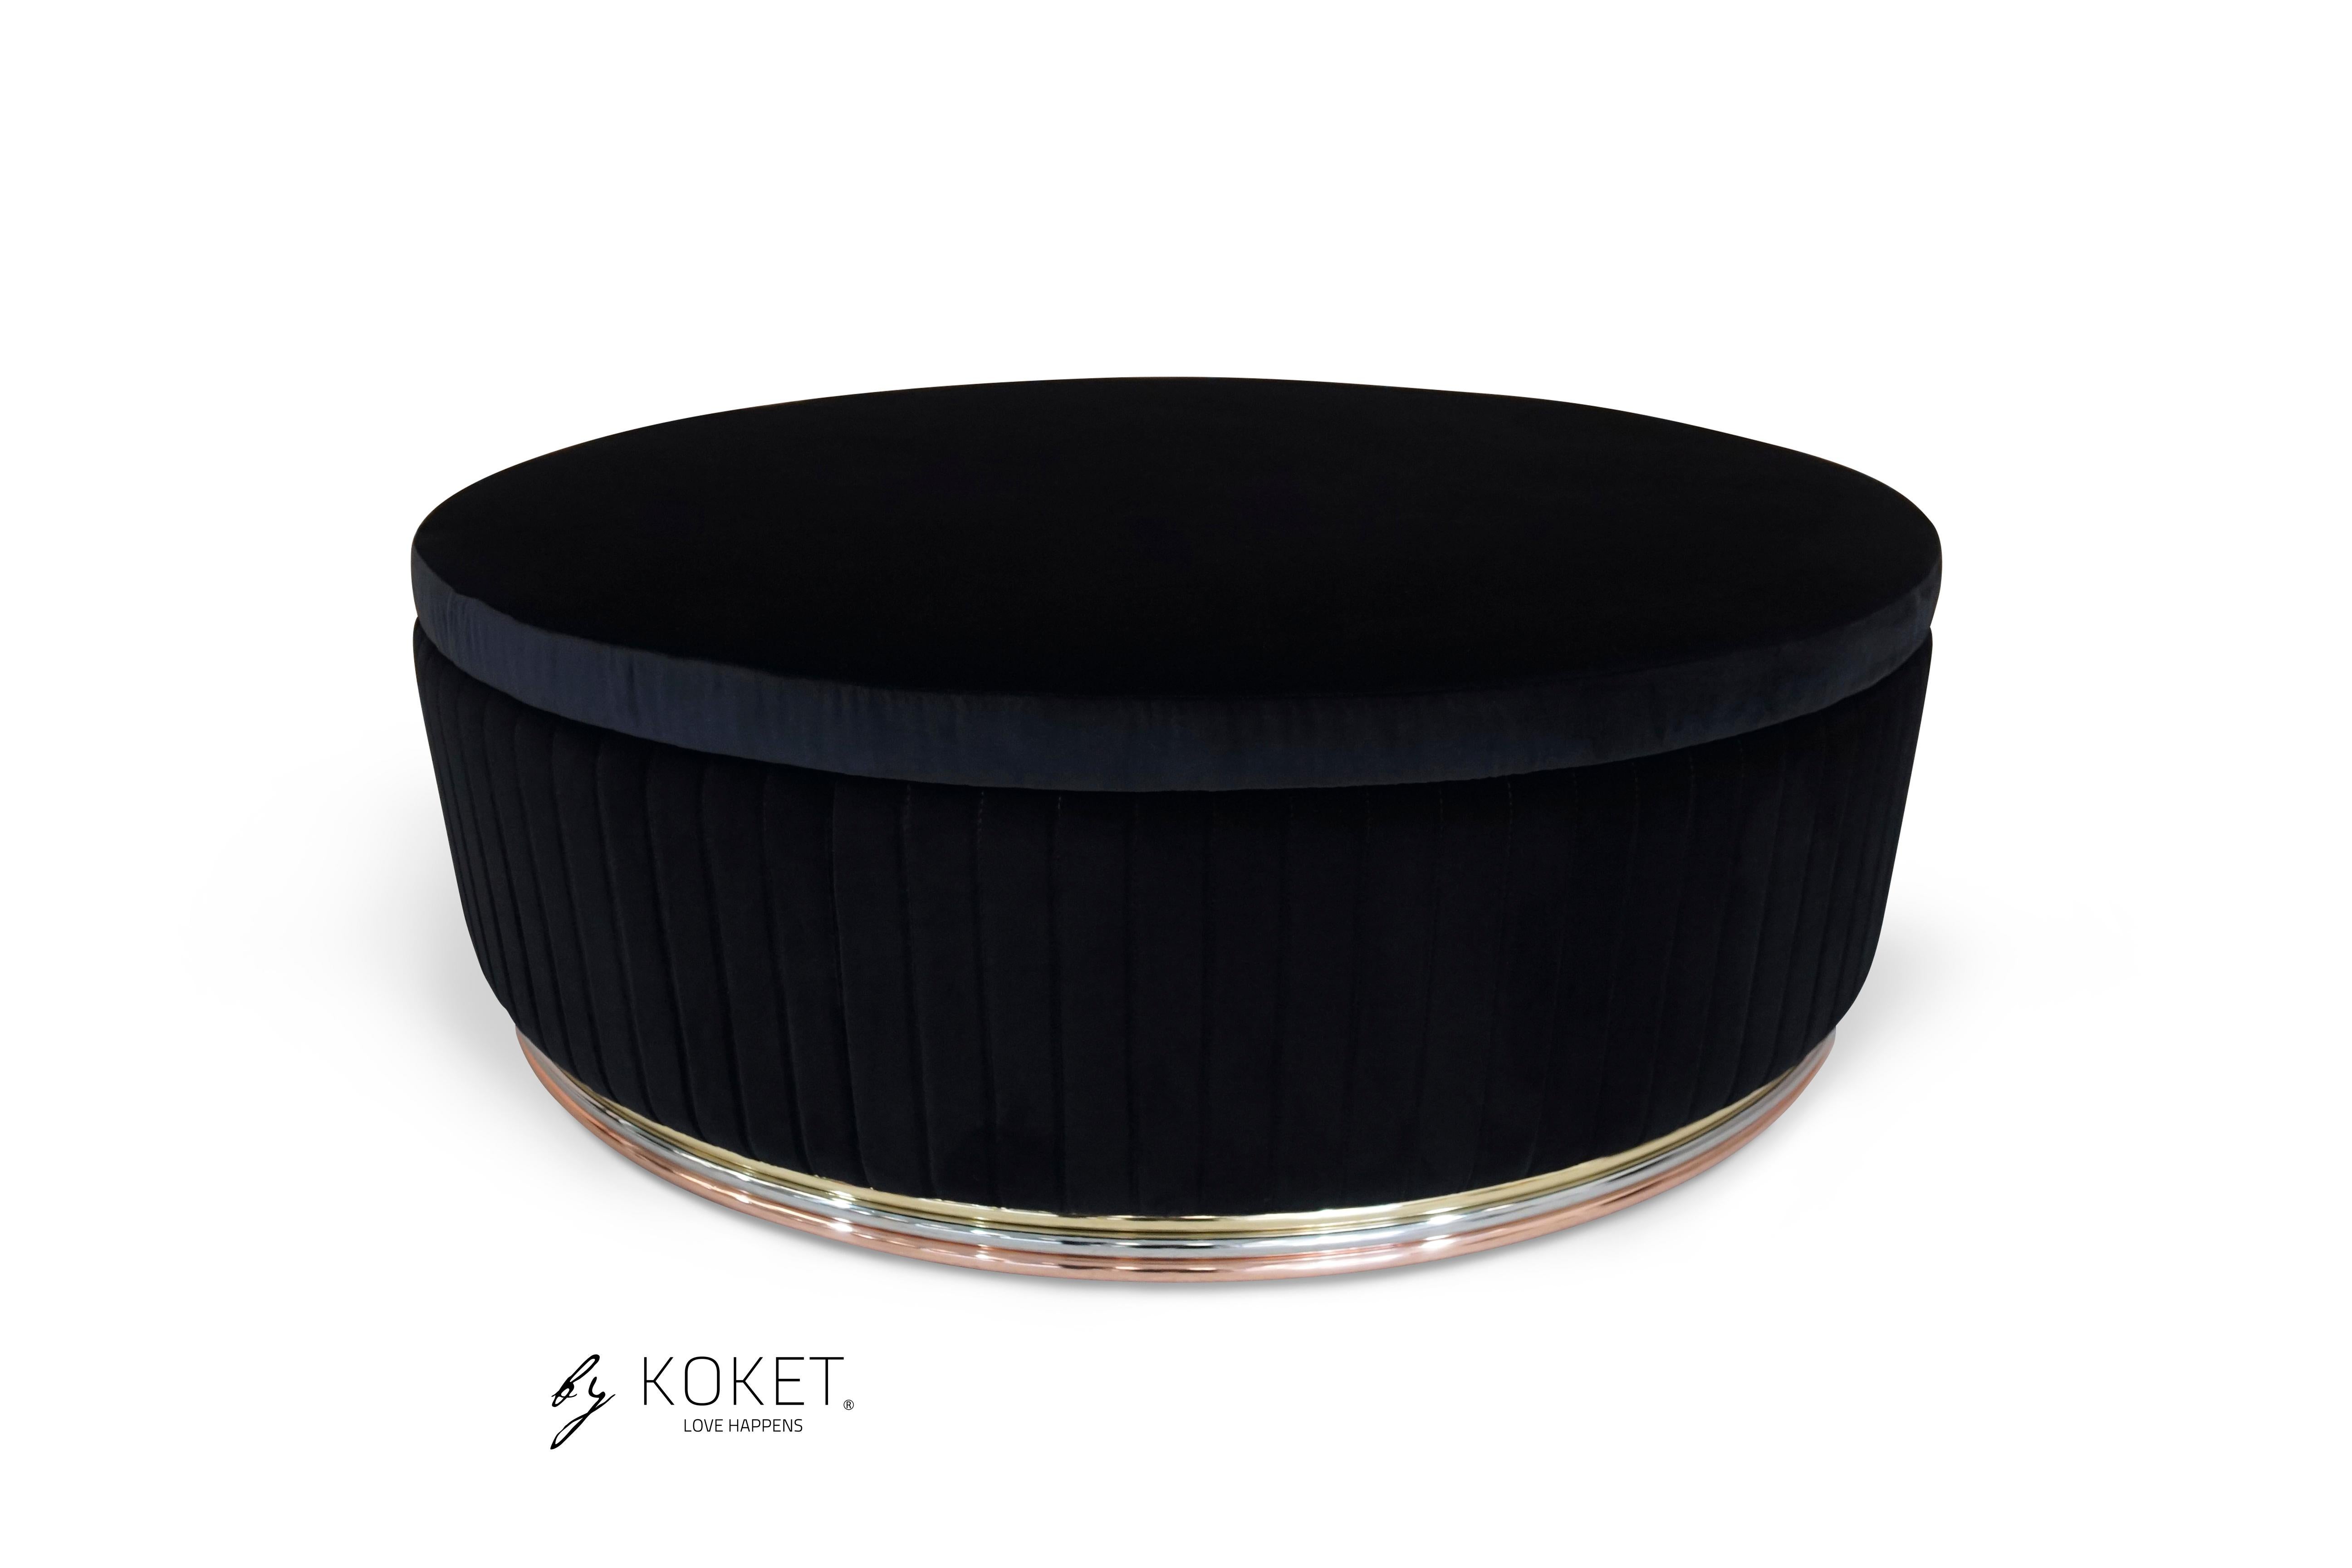 The soft lines and angles of the Mia Ottoman give her a gentle yet mesmerizing radiance making her a perfect addition to just about any space

As Shown
Upholstery: Lux Velvet  Deep Black (0968) from the KOKET Textiles collection.
Base: Polished